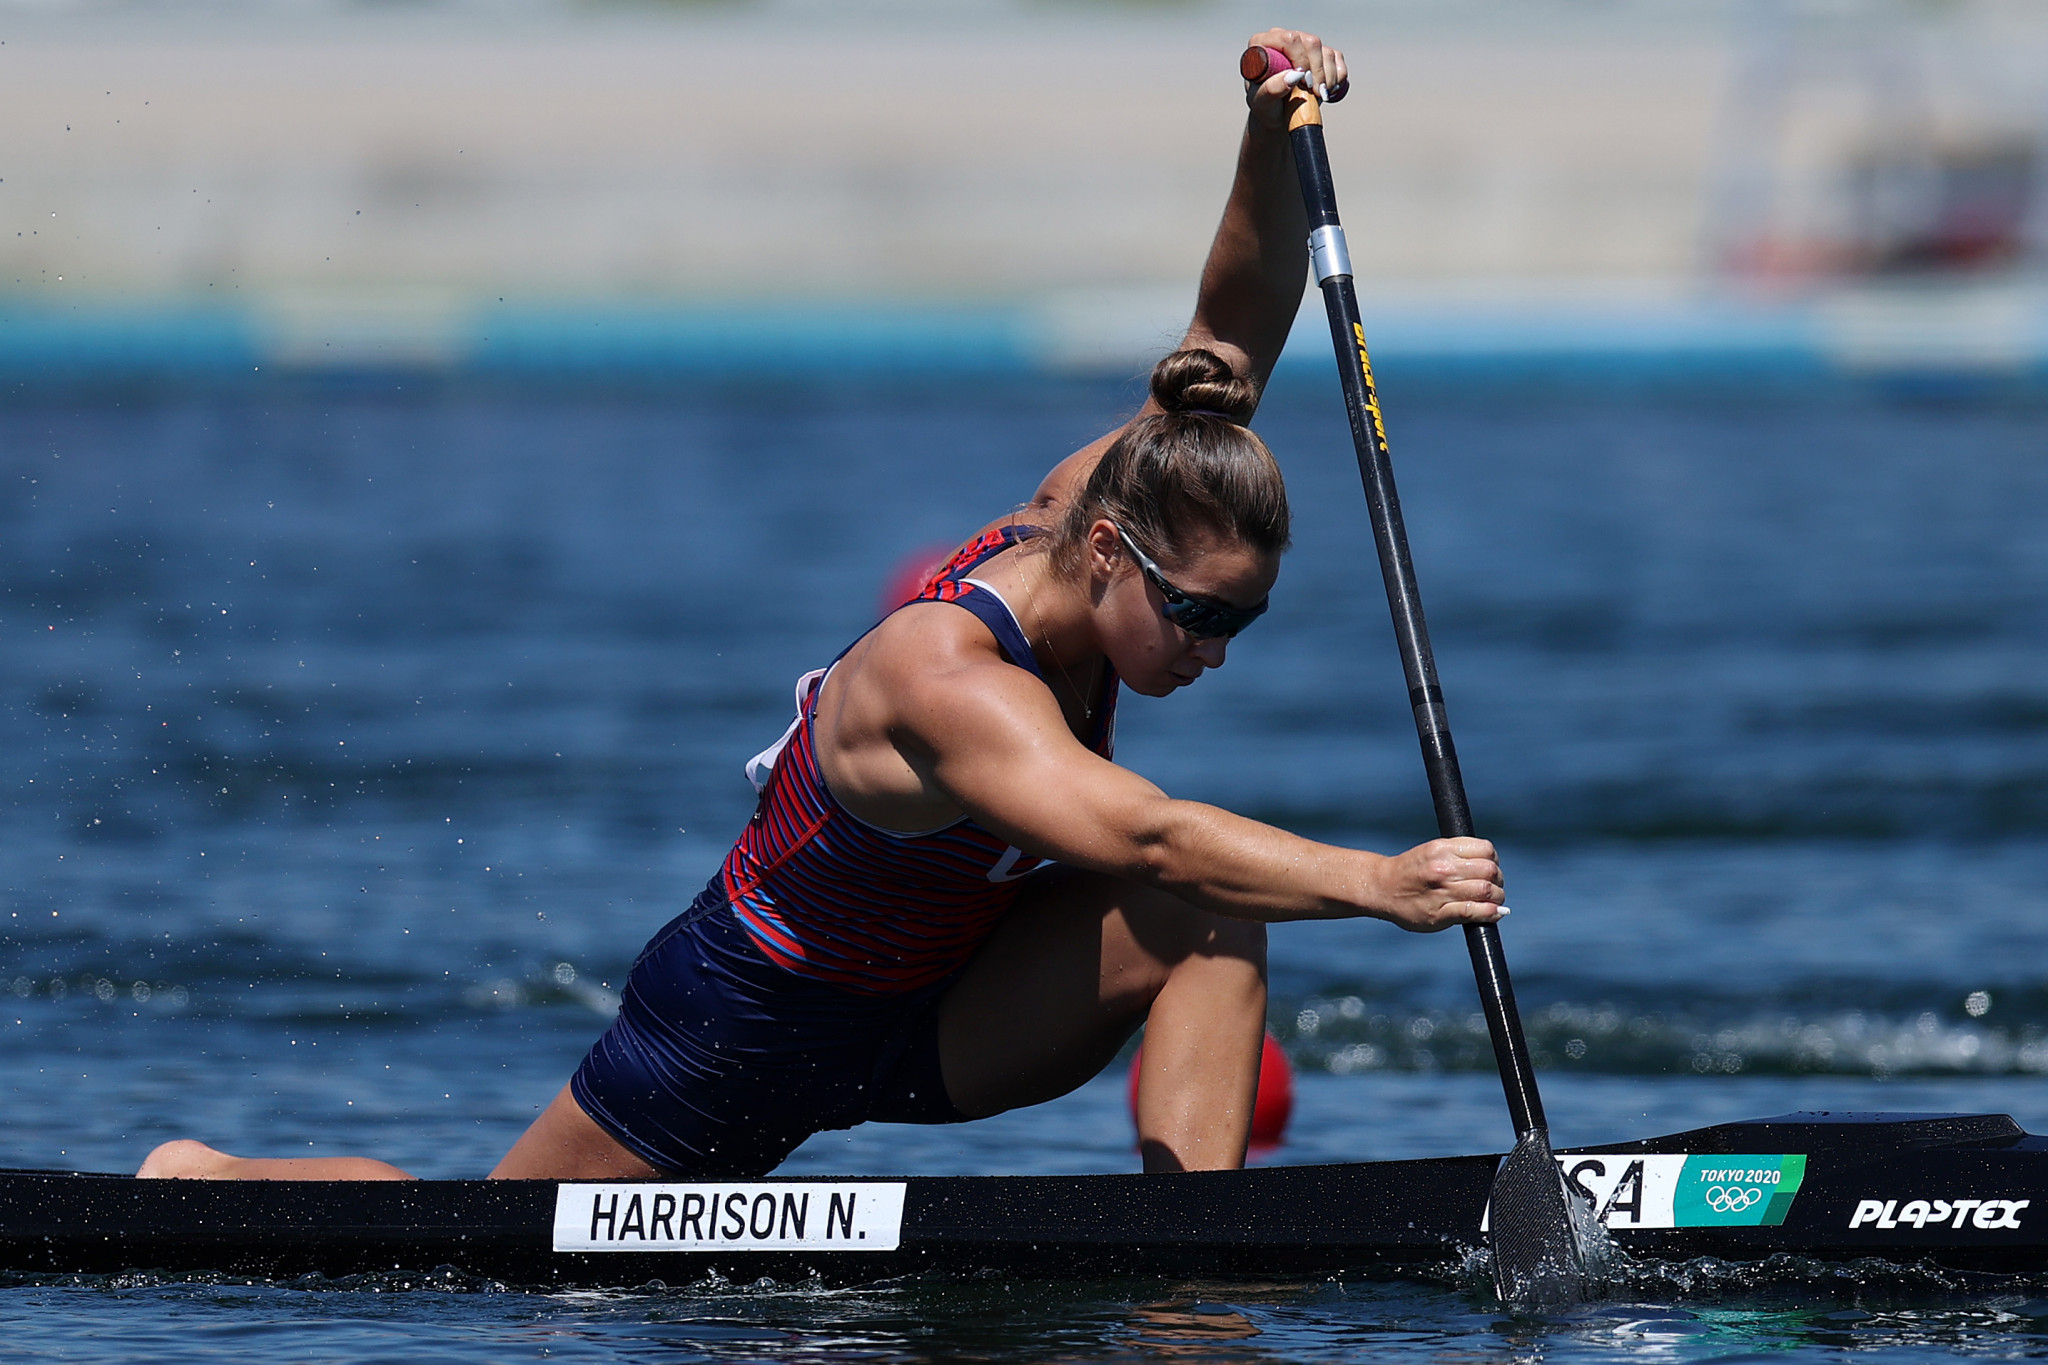 Mixed relays and SUP World Cup added to ICF Super Cup programme in Oklahoma City